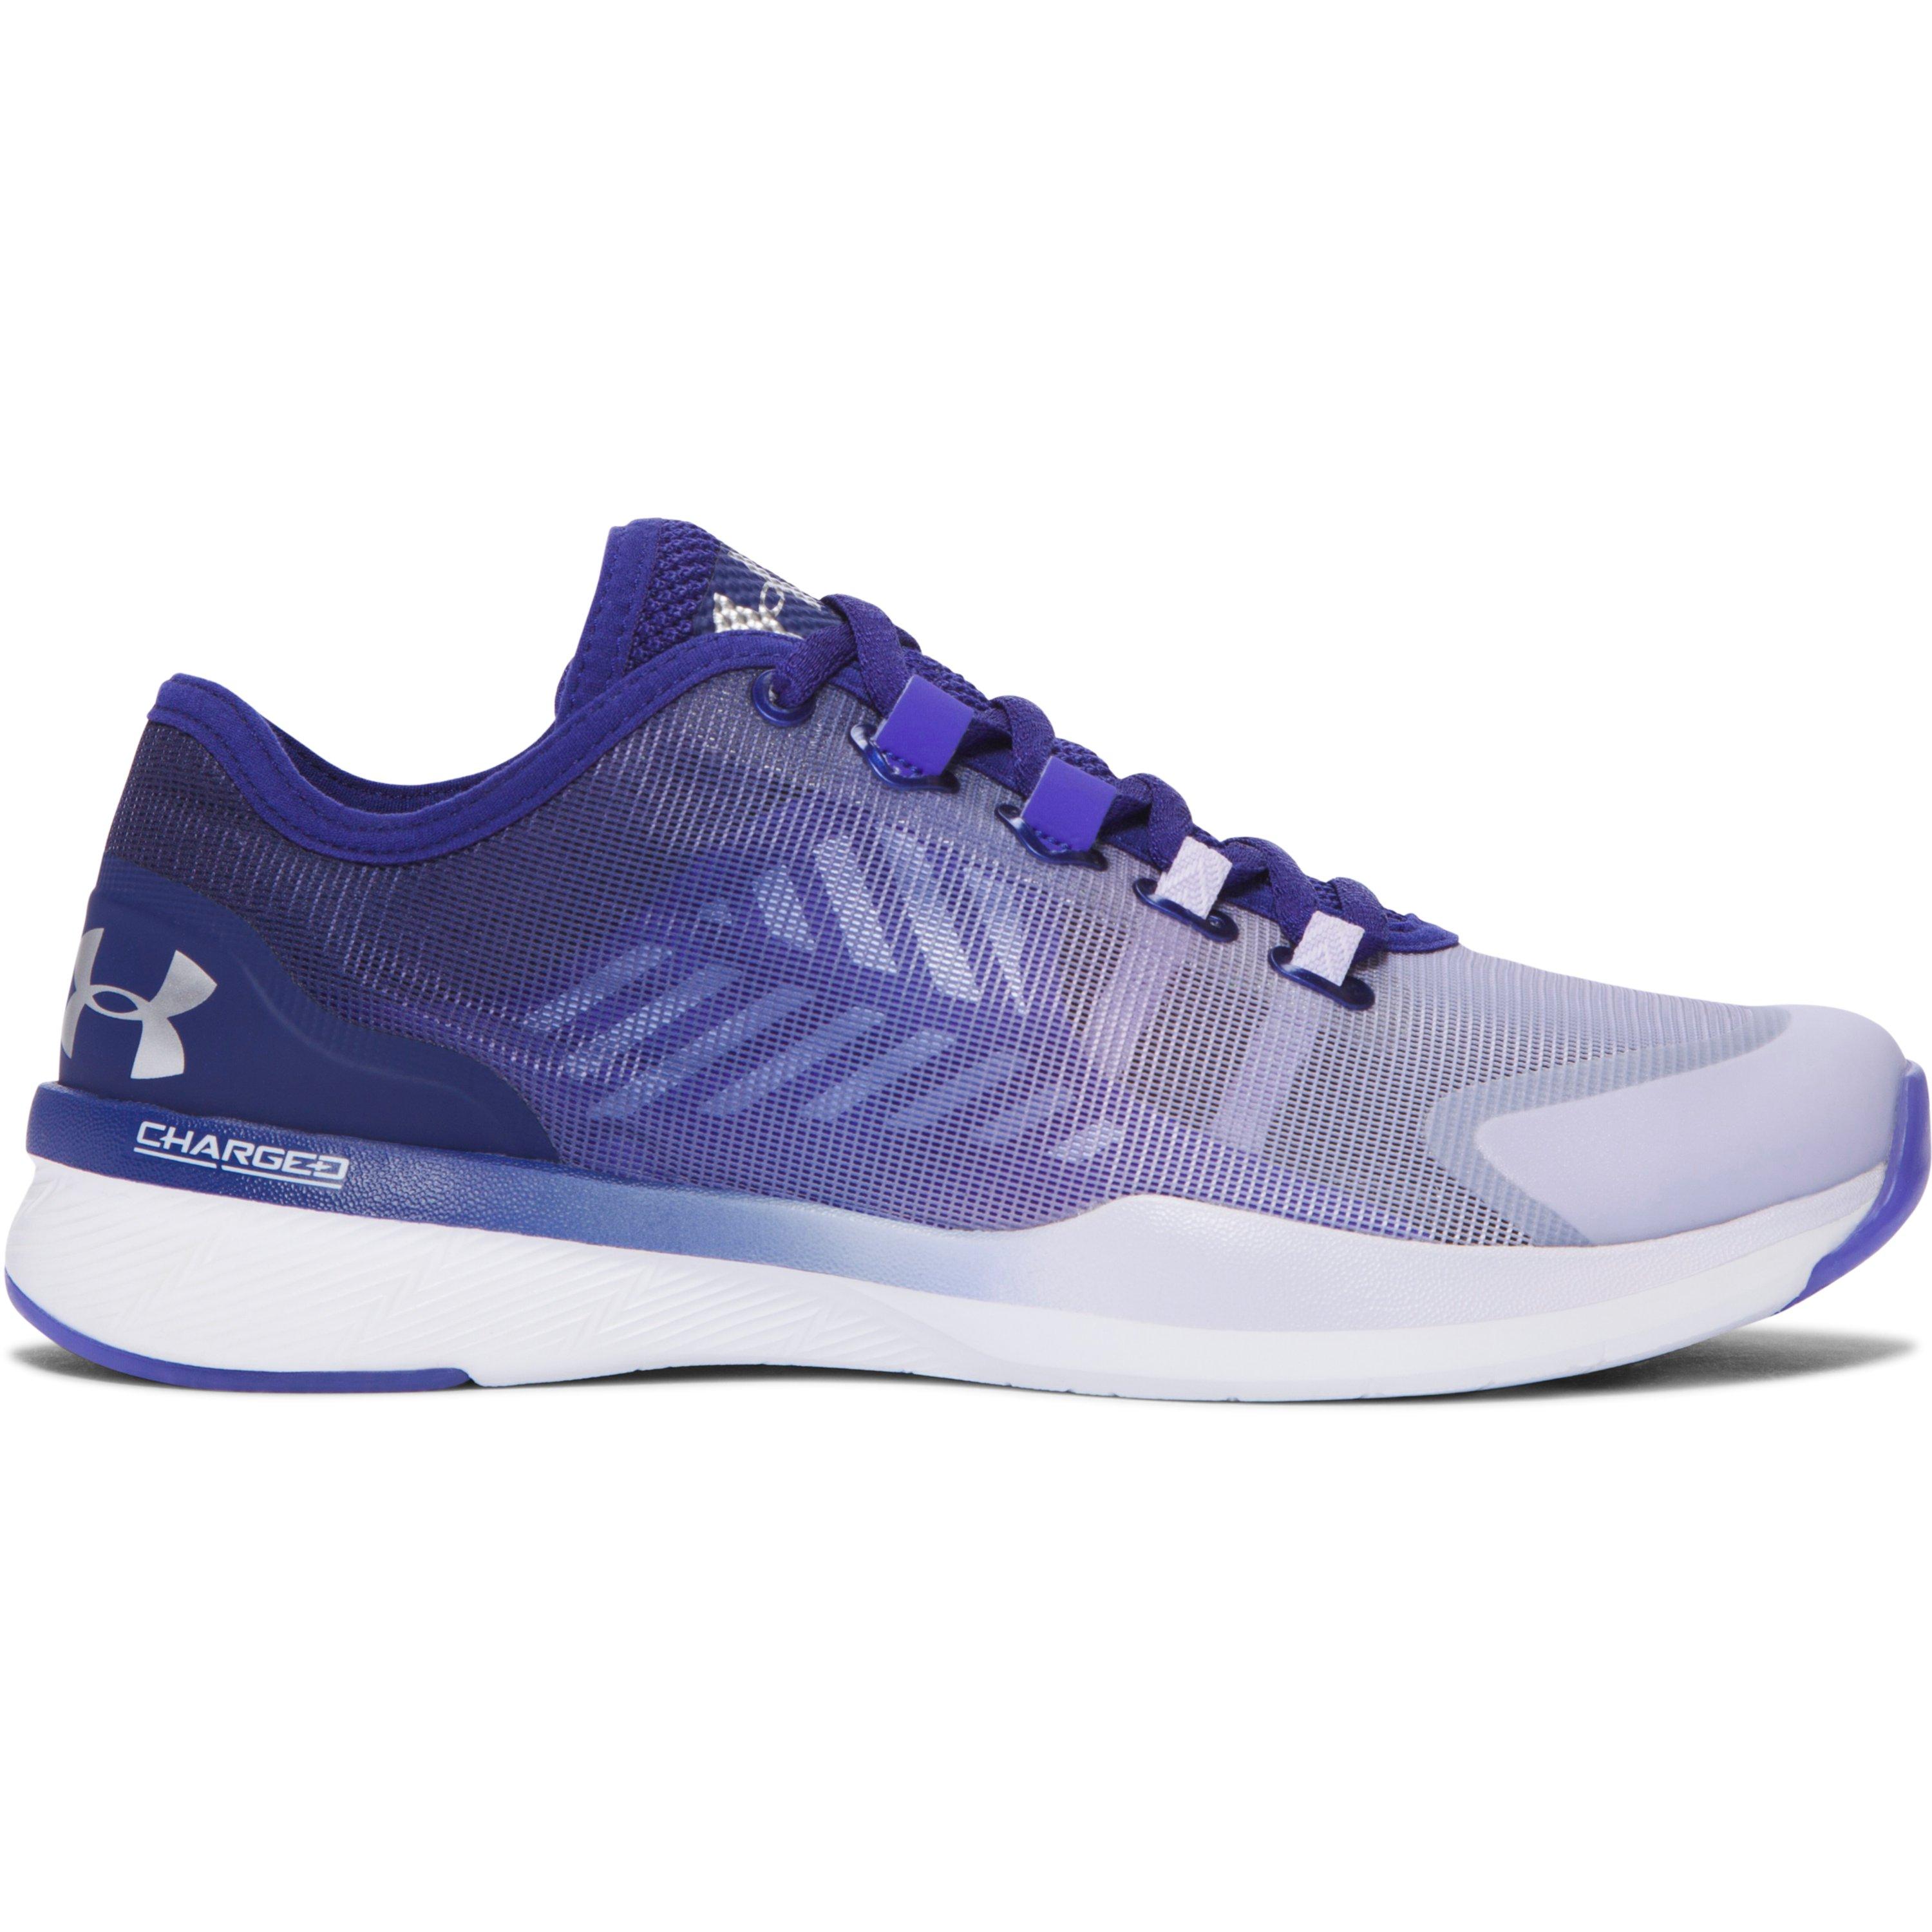 Under armour Women's Ua Charged Push Training Shoes in